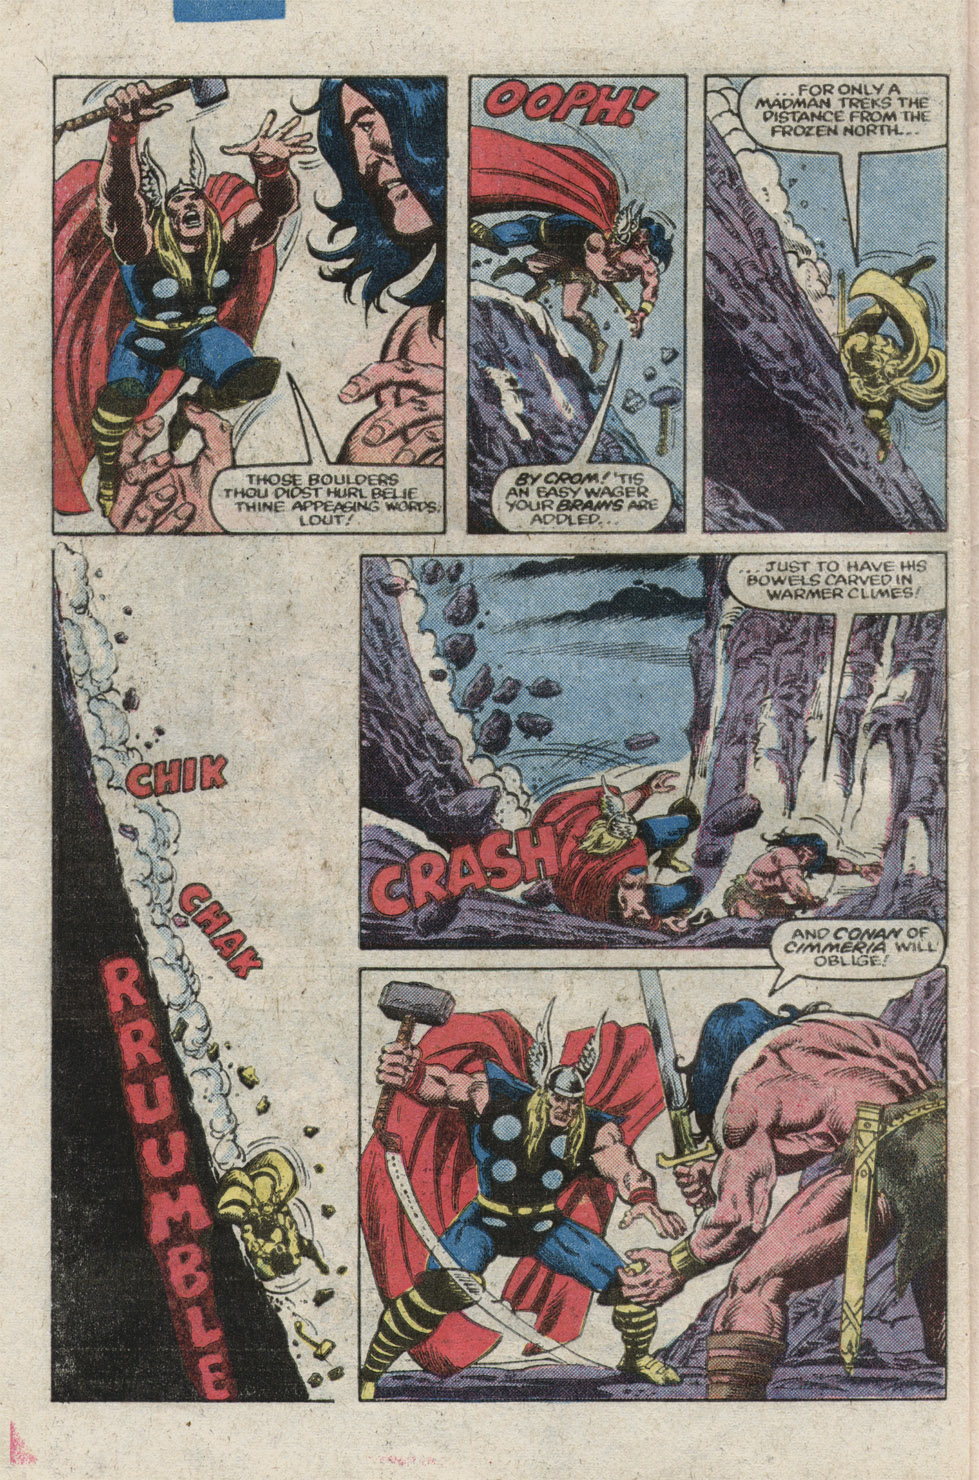 What If? (1977) issue 39 - Thor battled conan - Page 10